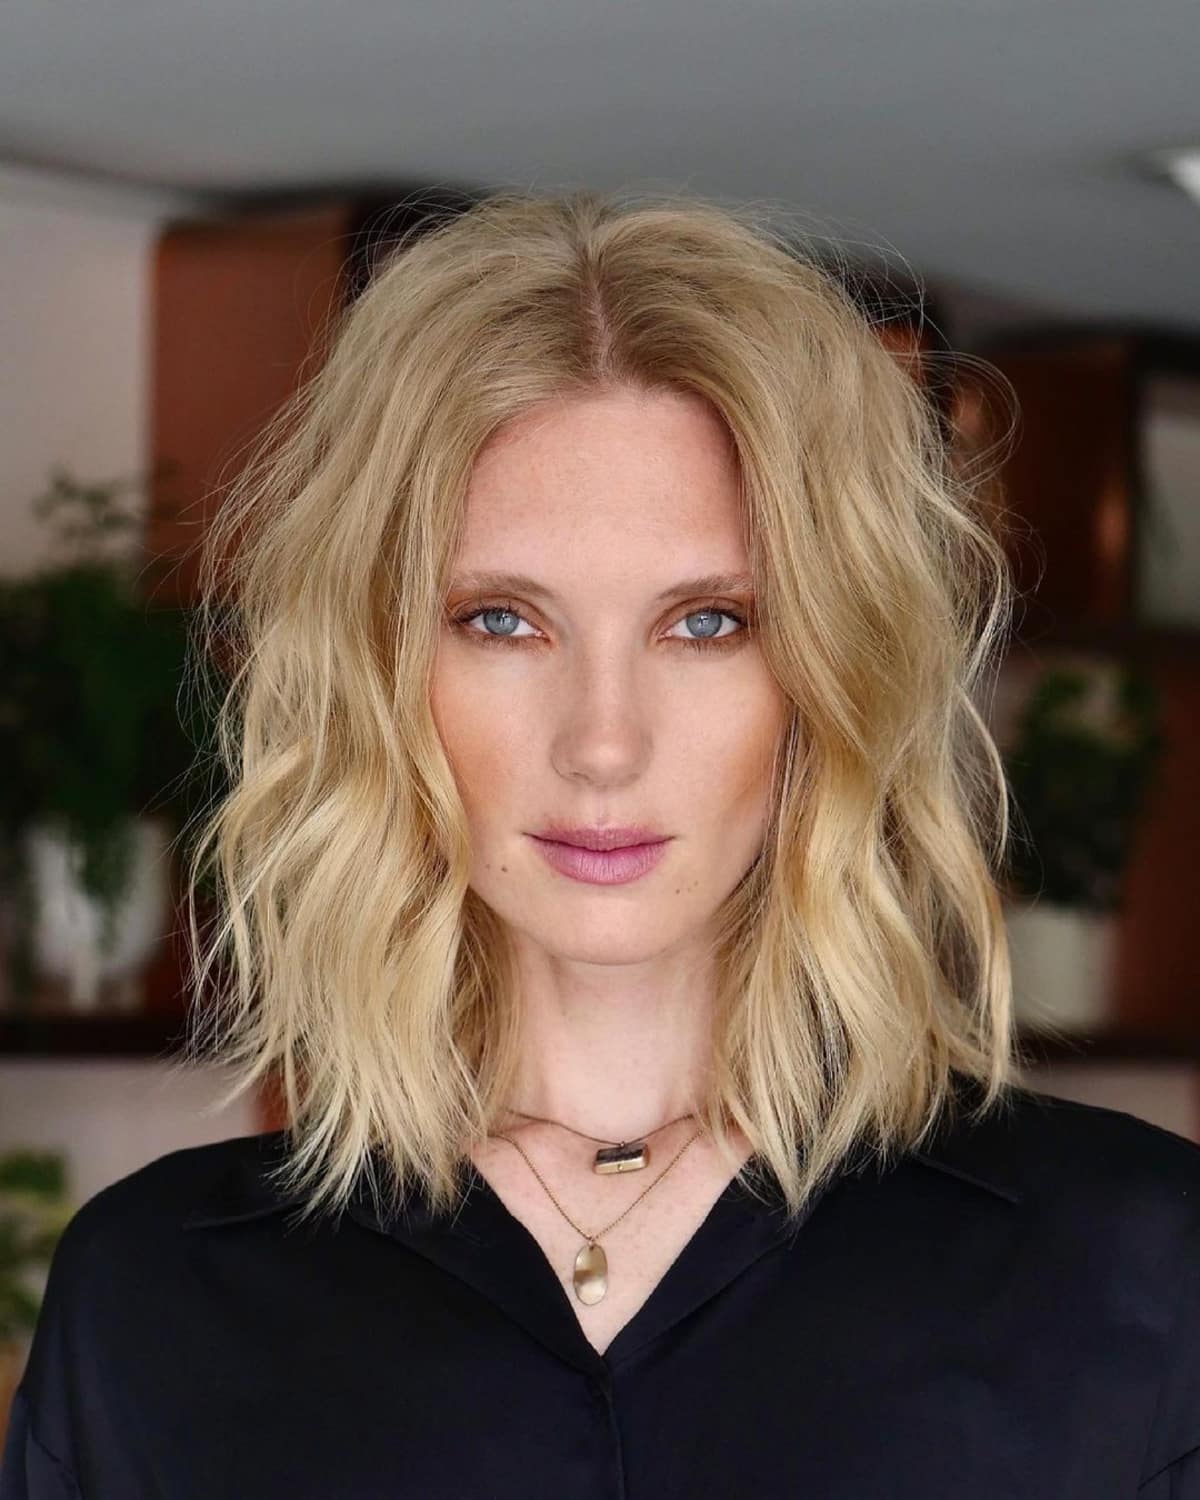 A refined blonde mid length haircut with longer layers and waves is a lovely idea if you want something edgy